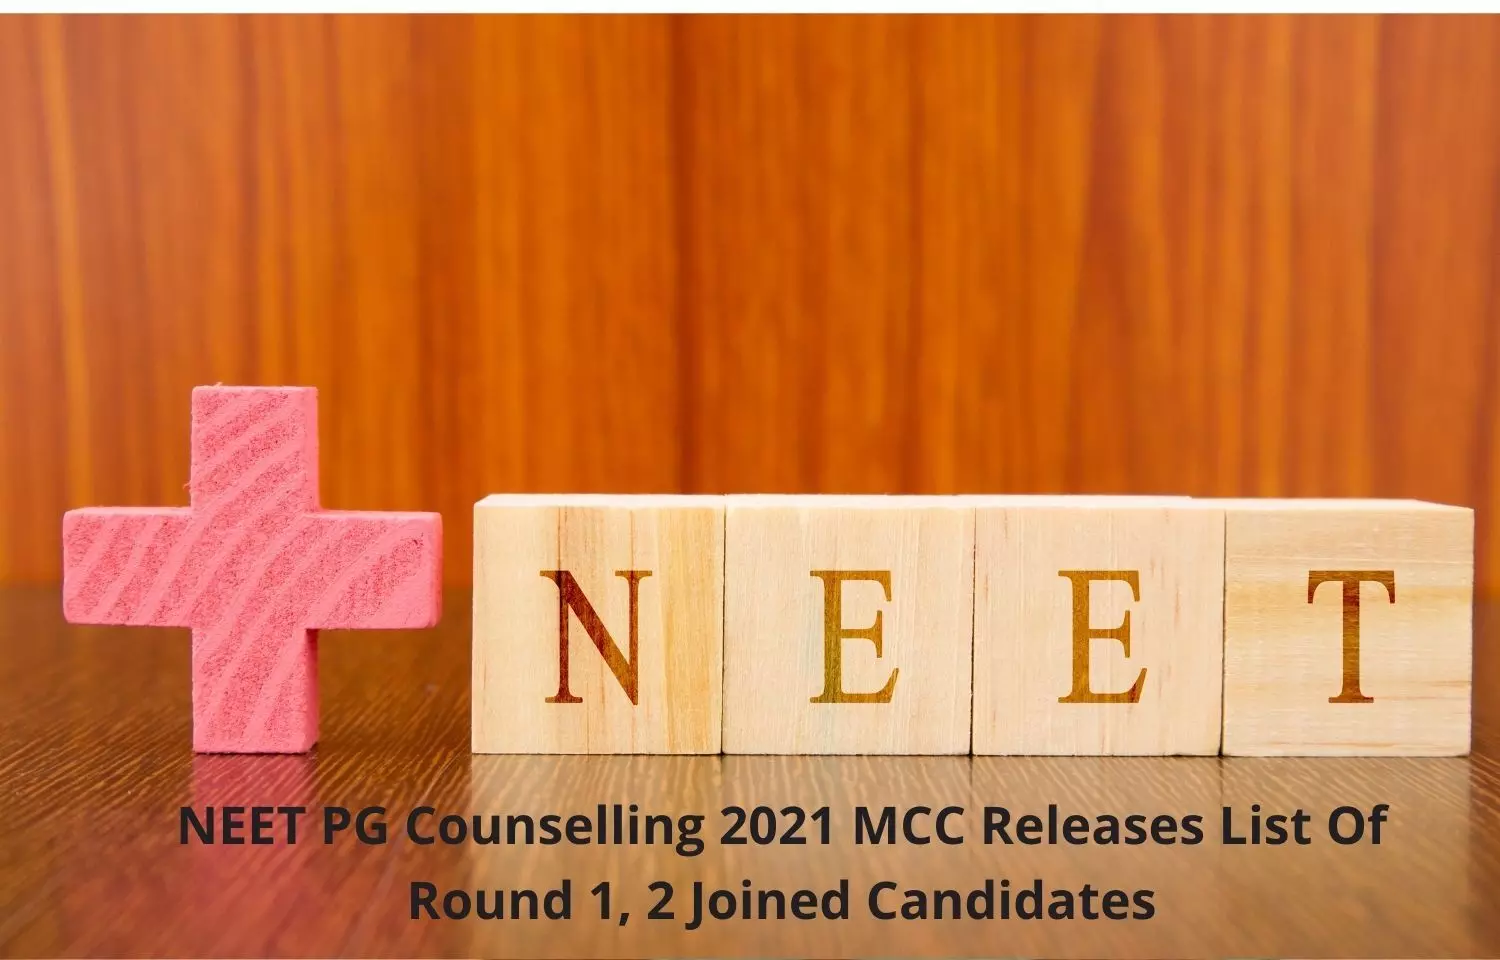 MCC Releases List Of Round 1, 2 Joined Candidates for NEET PG counselling 2021